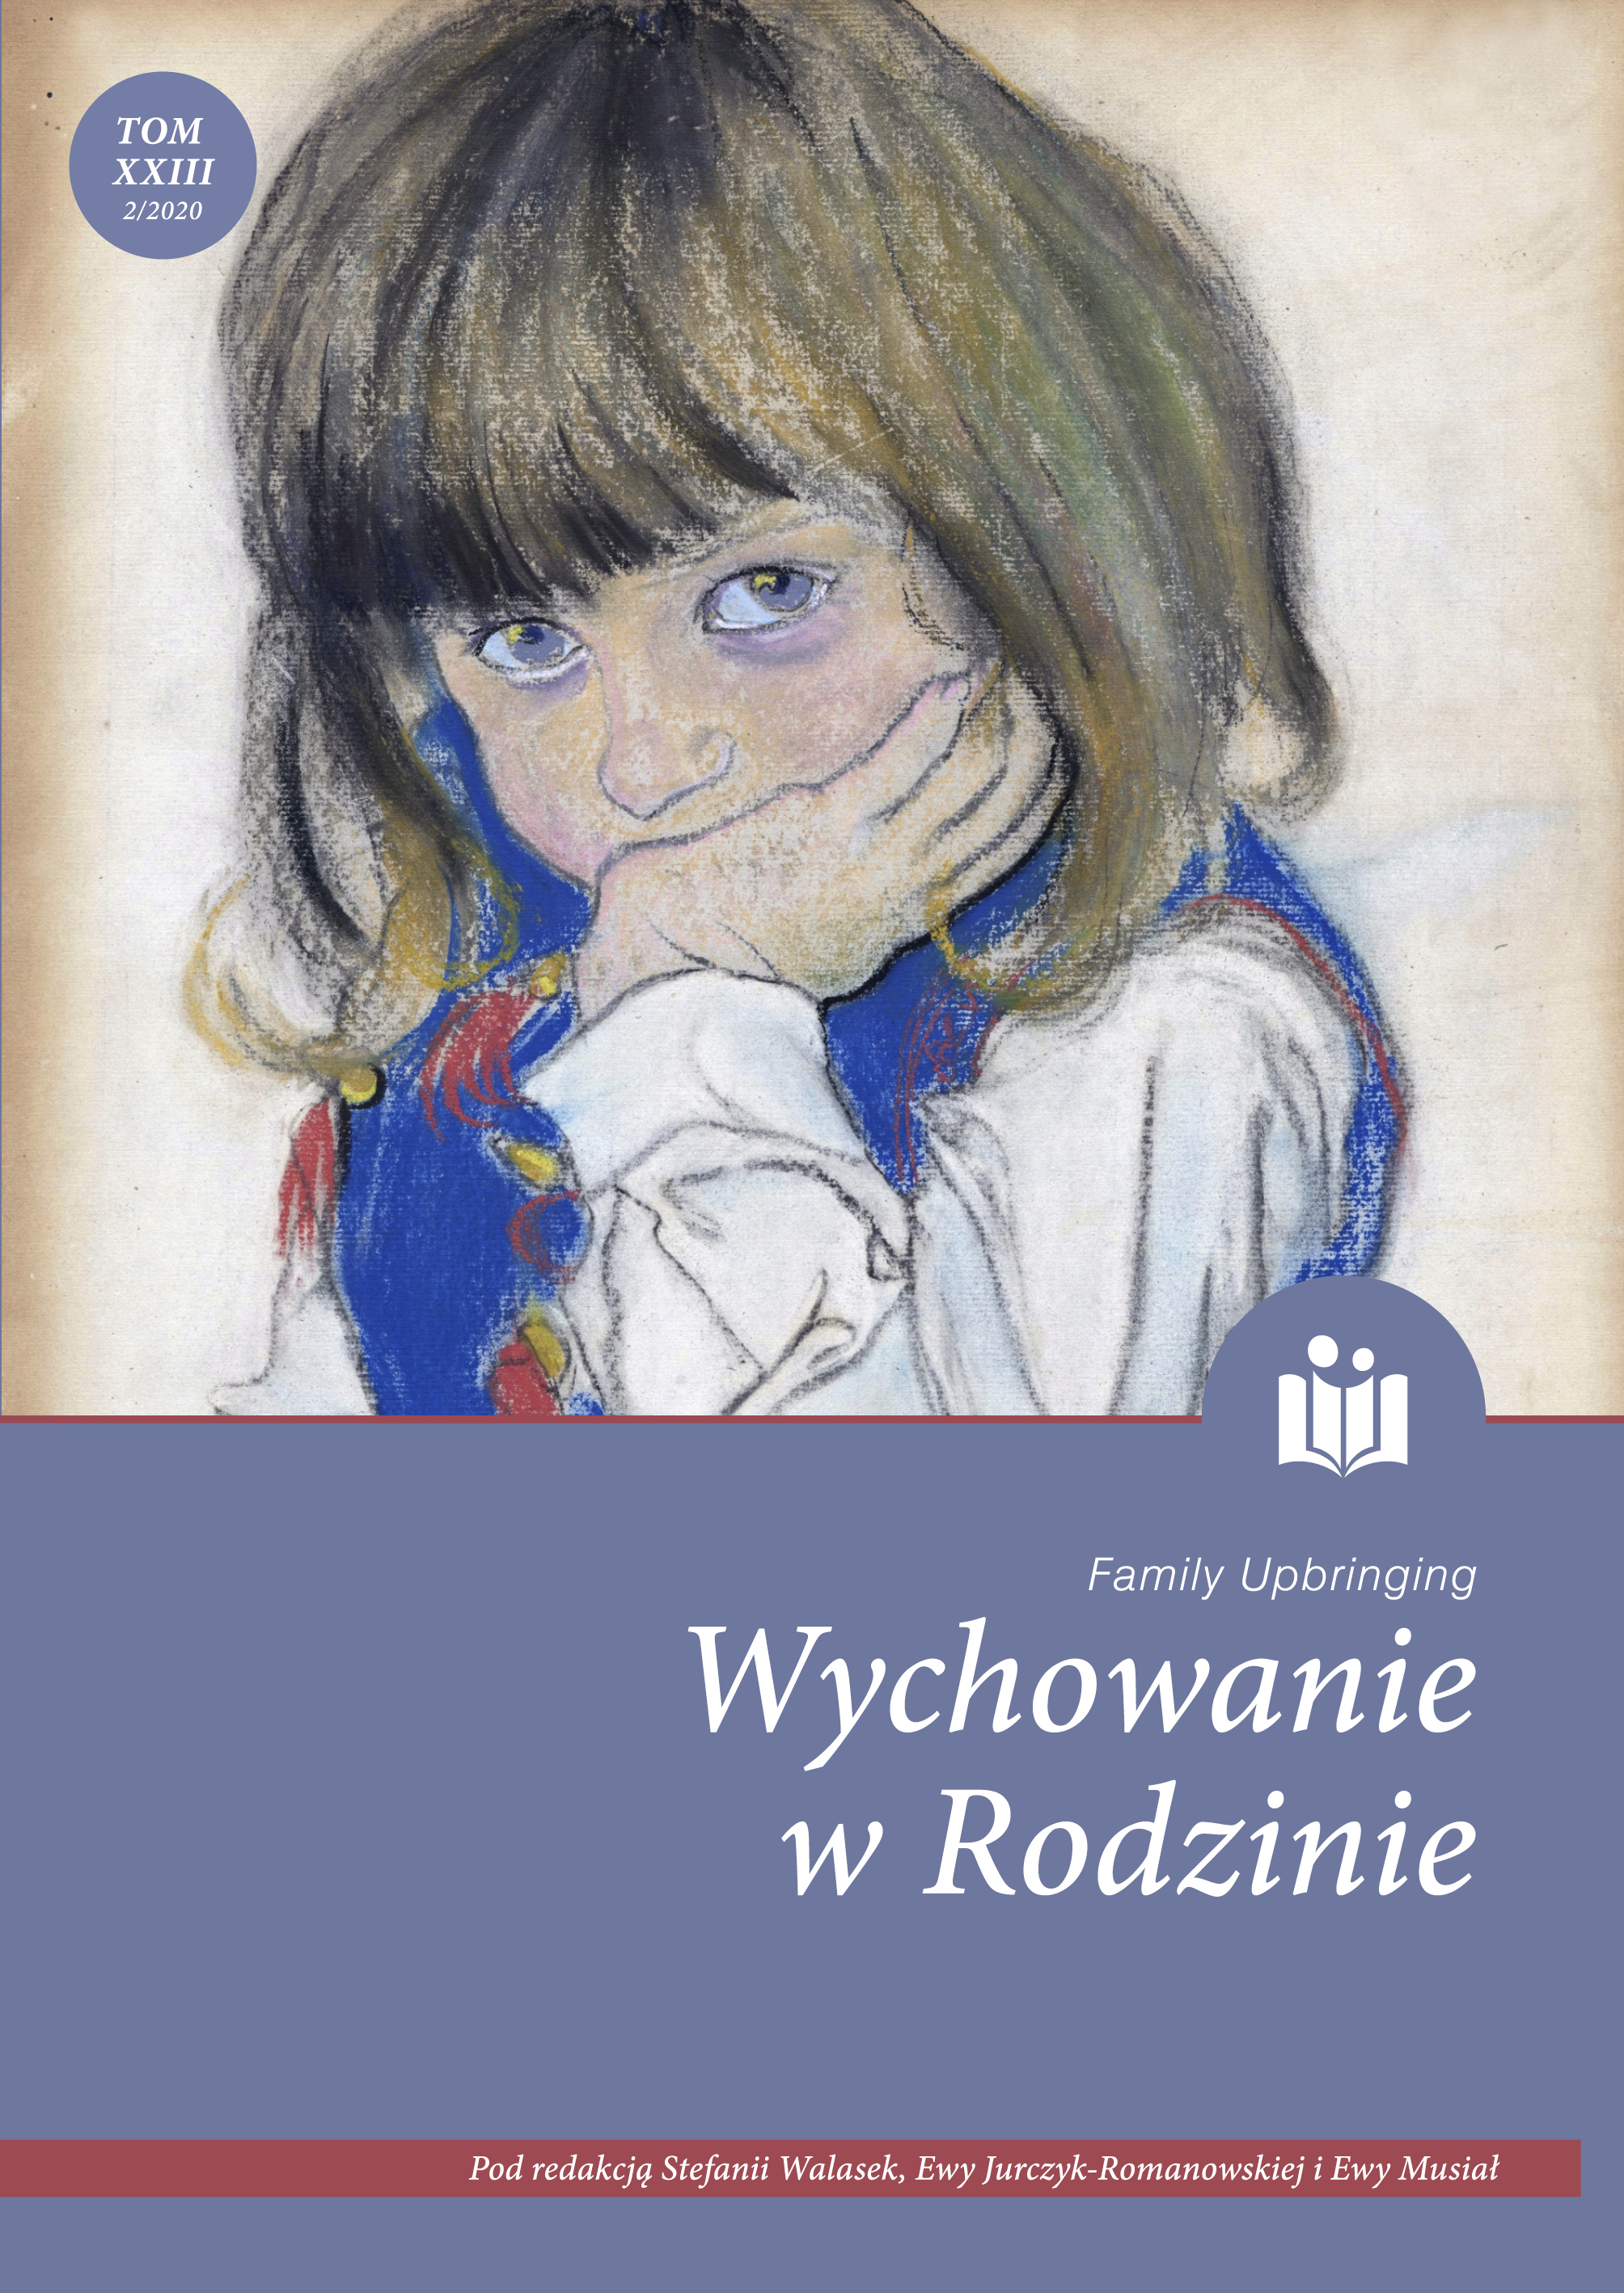 On the issues of sexuality education in Poland Cover Image